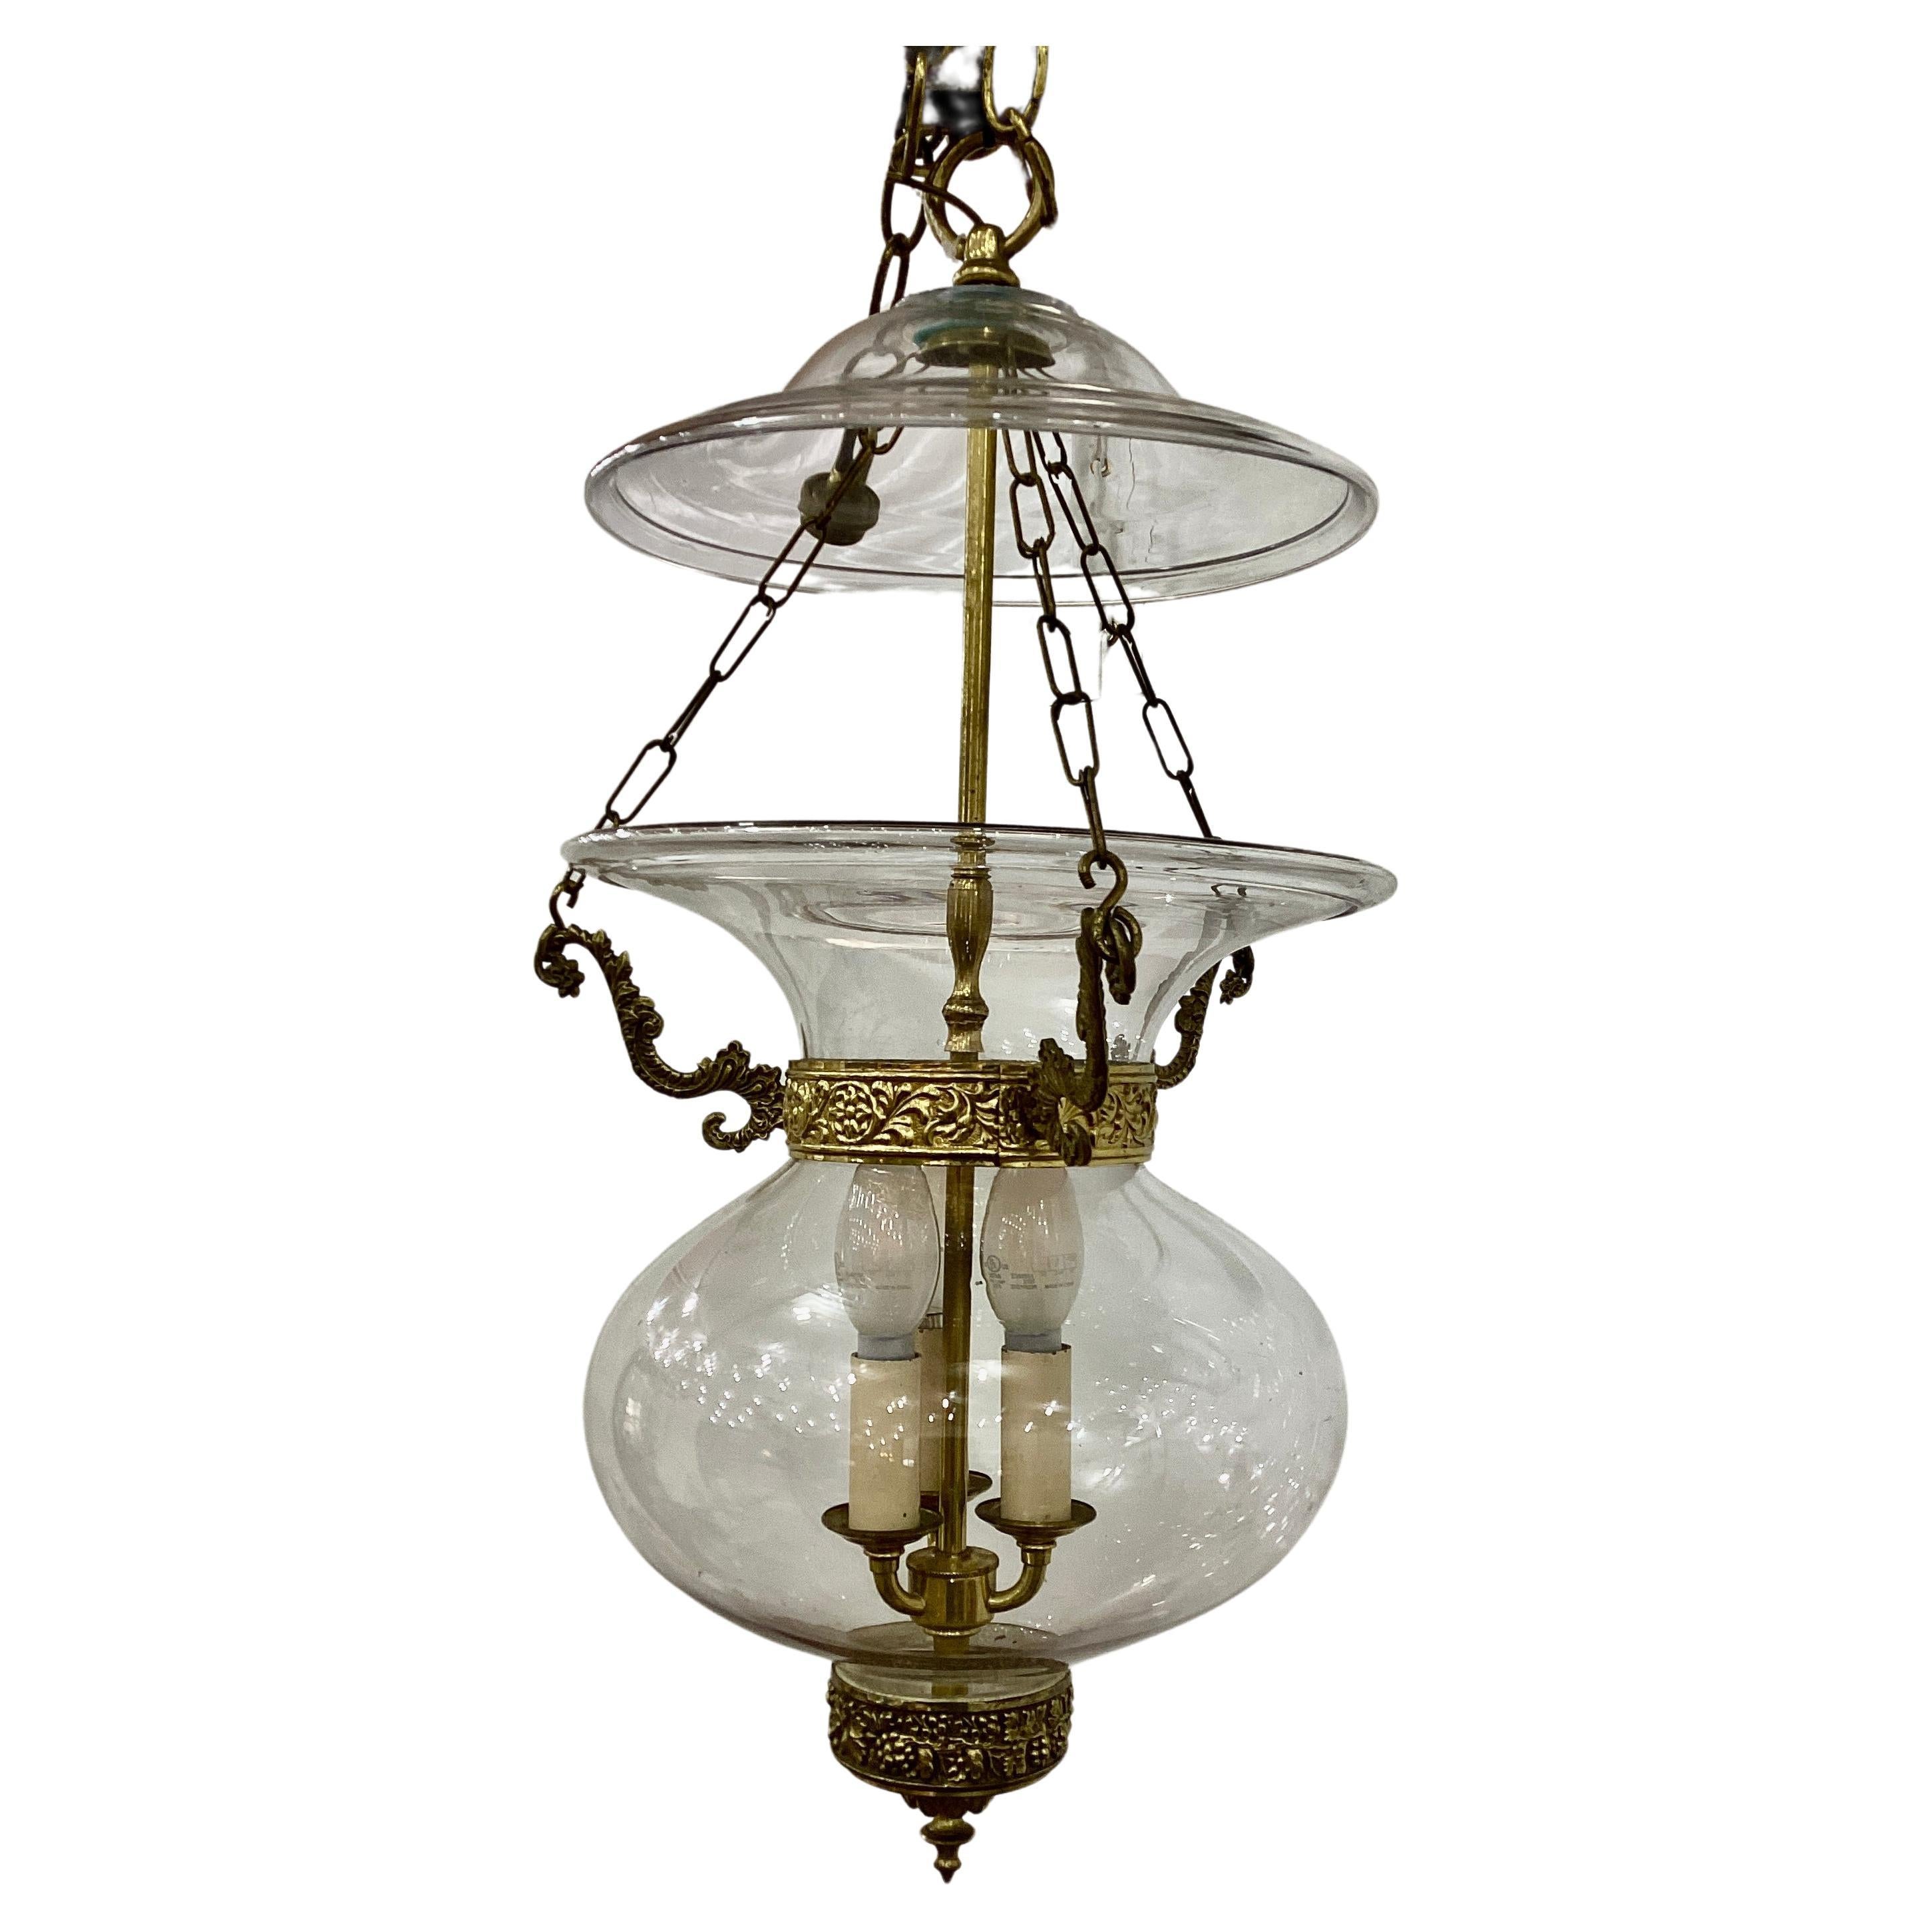 What is a glass bell jar?